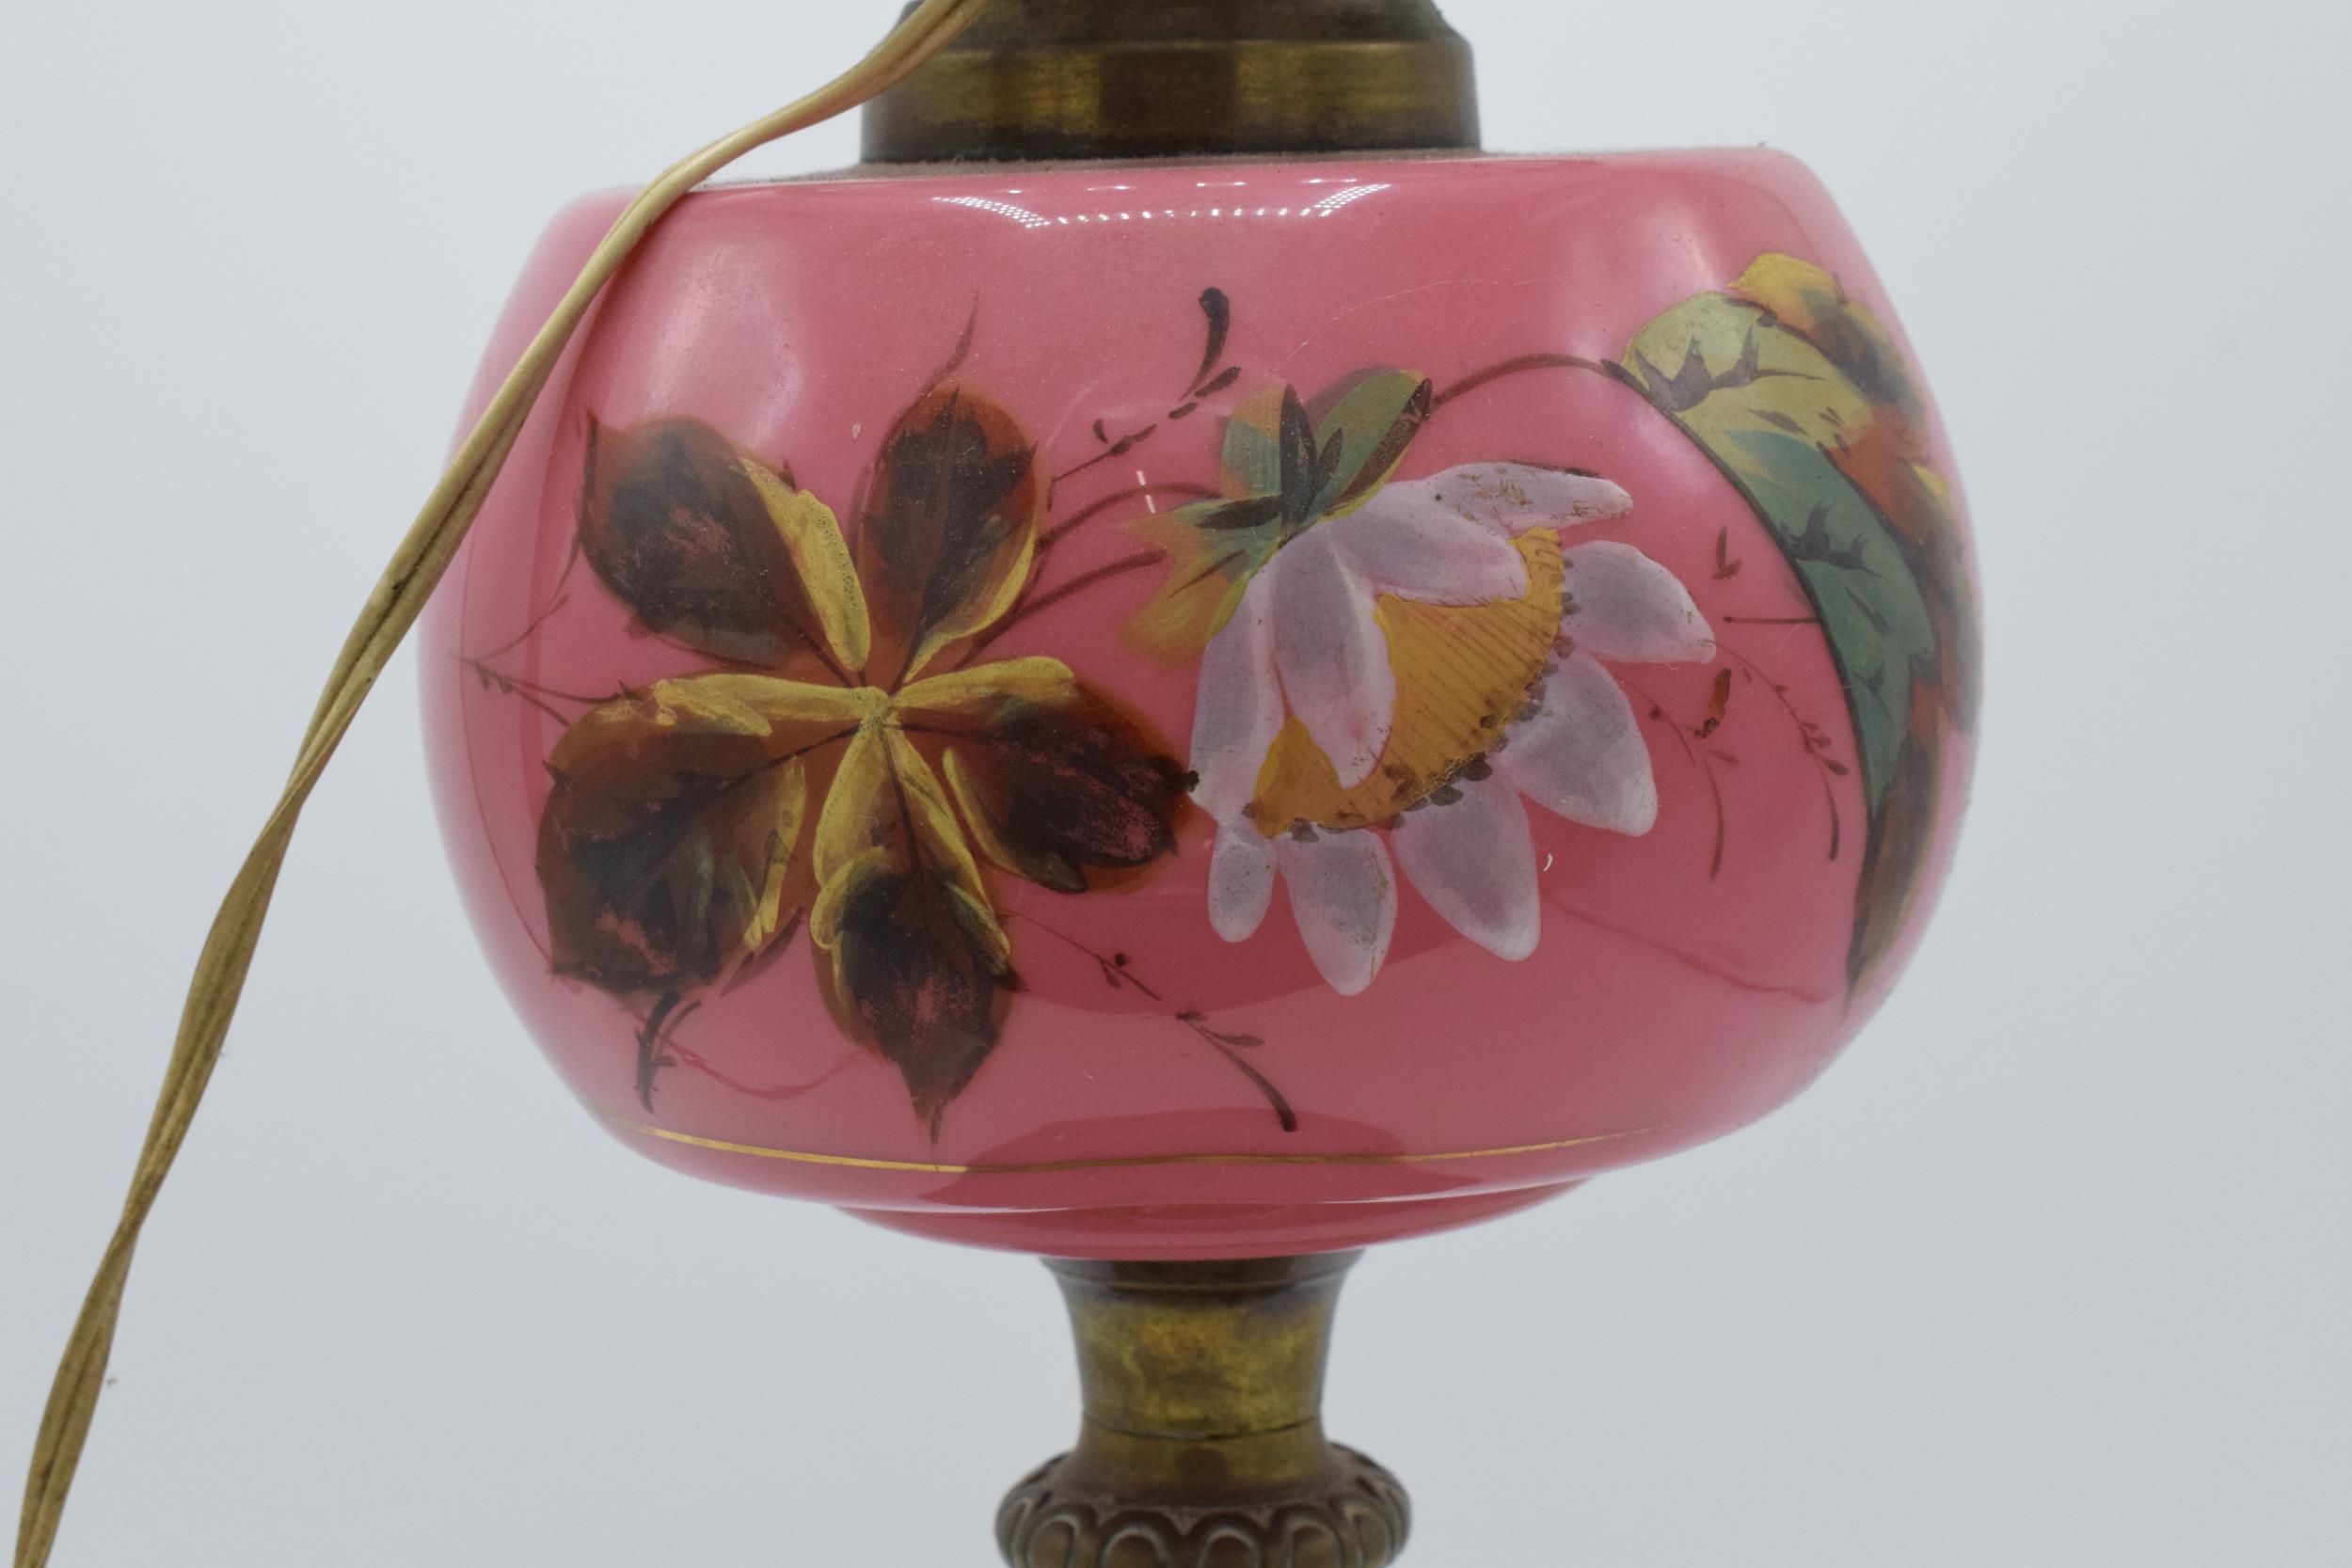 Late 19th century / early 20th century brass oil lamp with pink glass converted into electric - Image 4 of 6